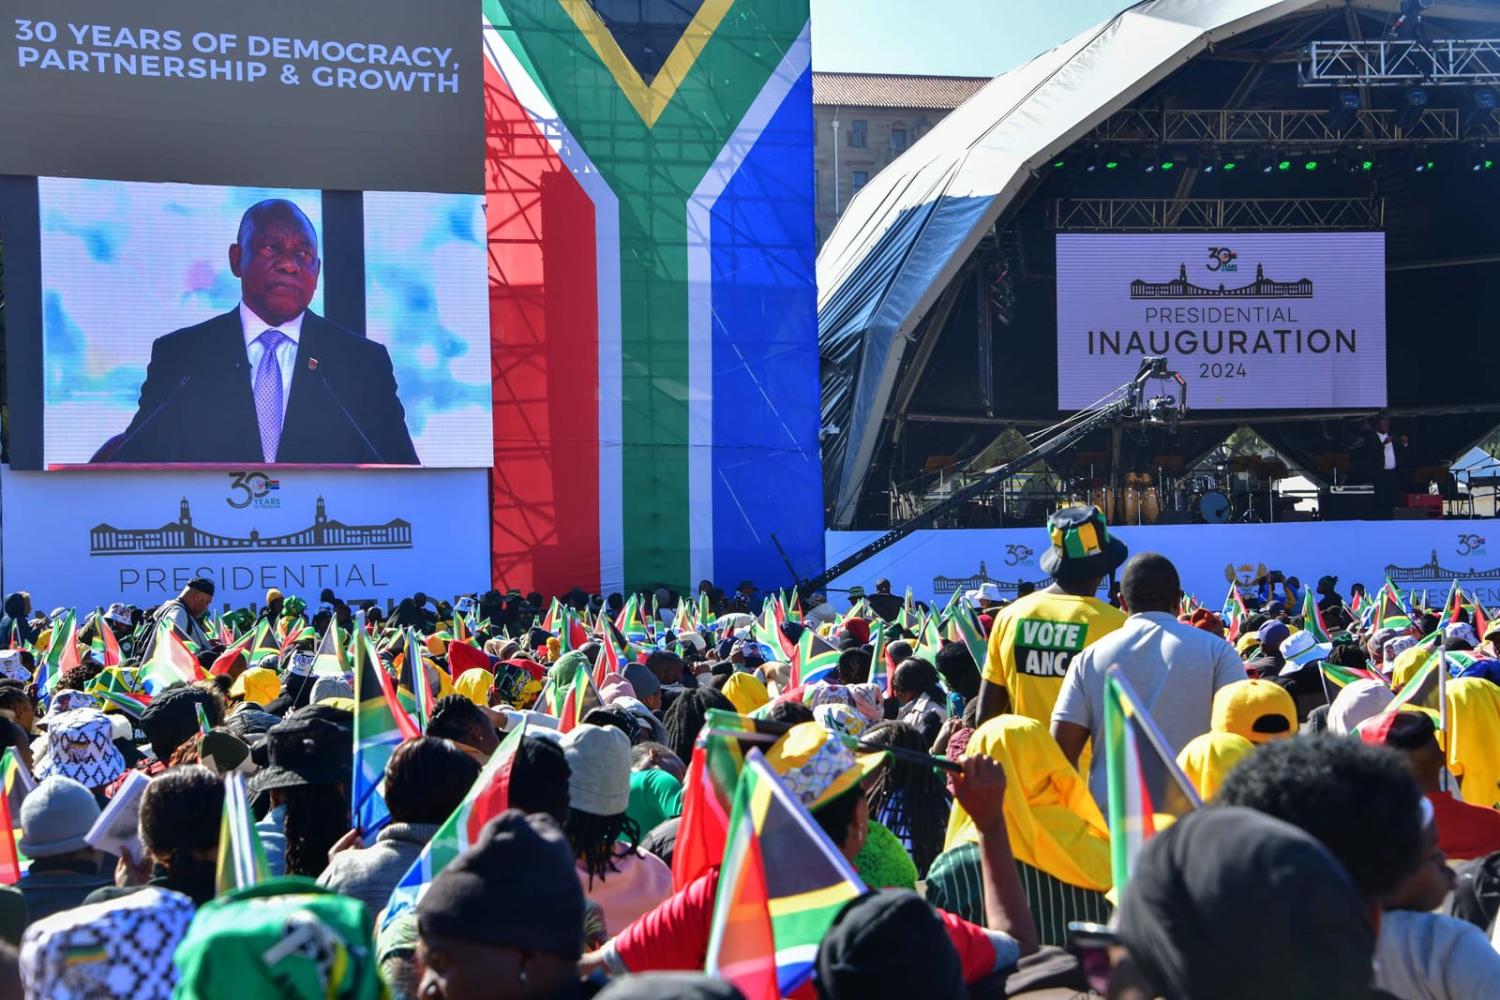 President Cyril Ramaphosa delivers his inauguration address for a second term at the Union Buildings in Pretoria, South Africa (GCIS/GovernmentZA)